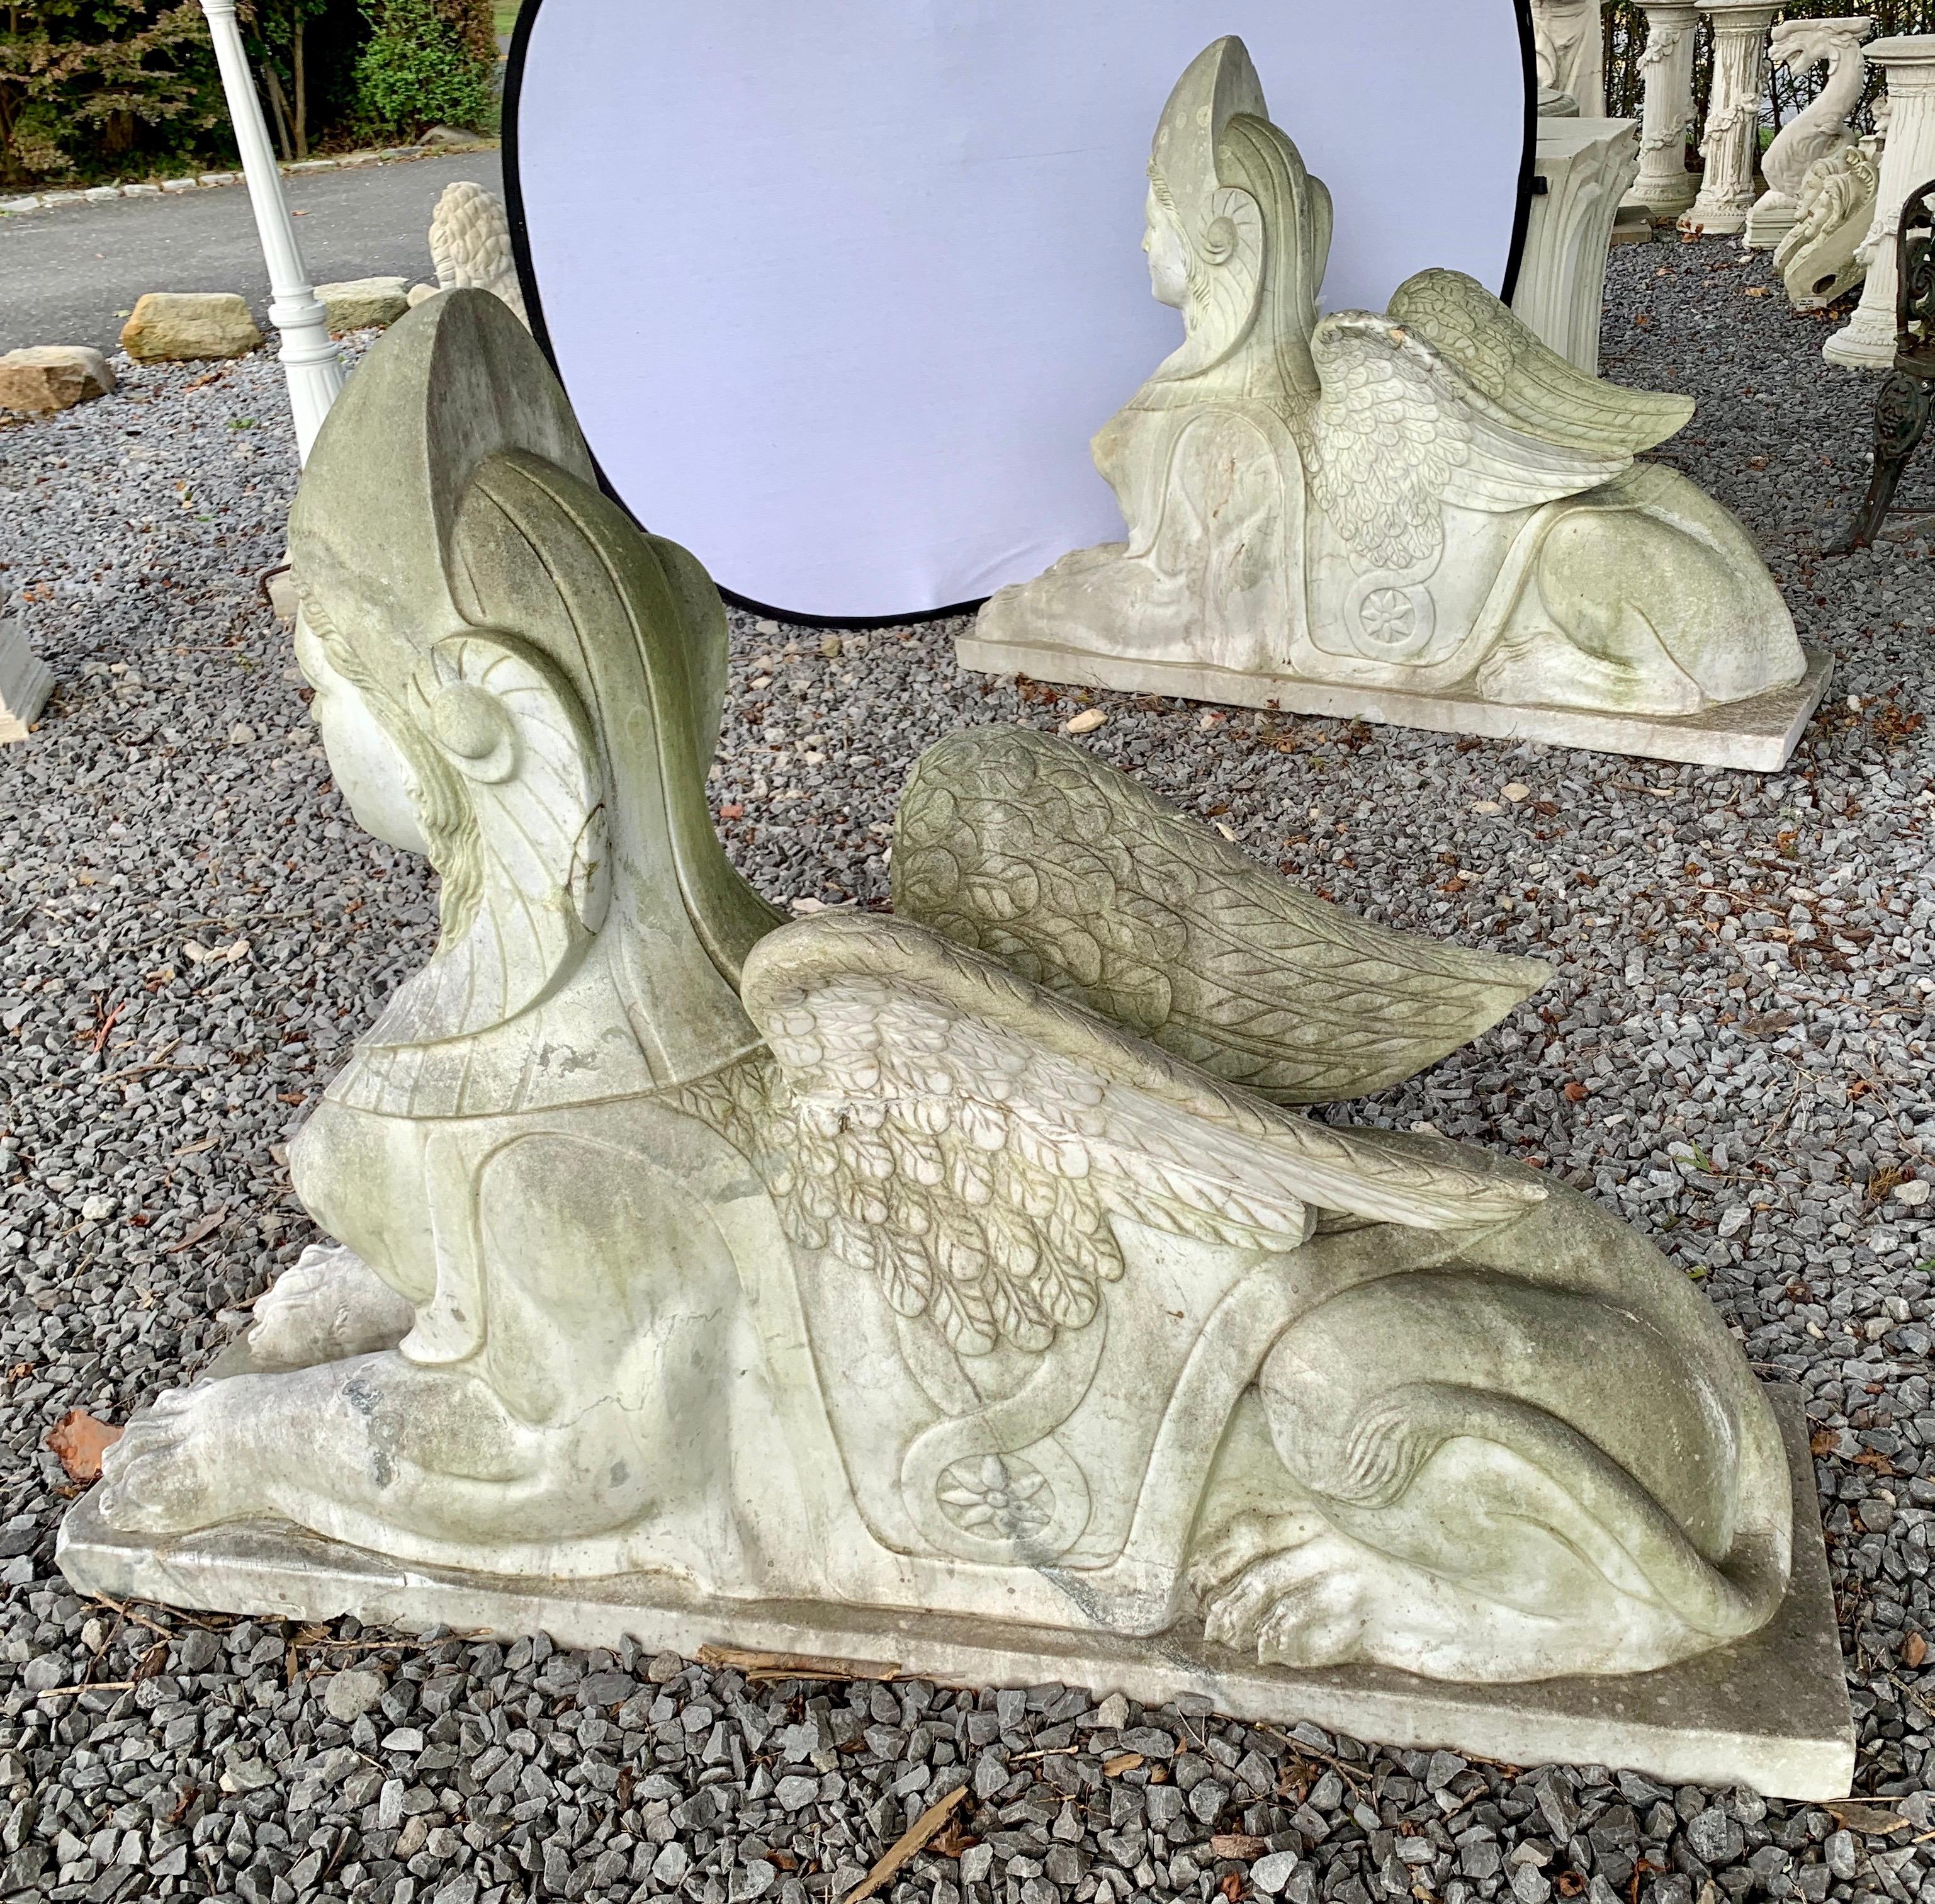 Stunning pair of early 20th century Egyptian Revival marble garden sphinxes. Each have female heads and drapery on lion bodies. From one of the finest homes on Long Island. They each weigh several hundred pounds each. Now, more than ever, home is